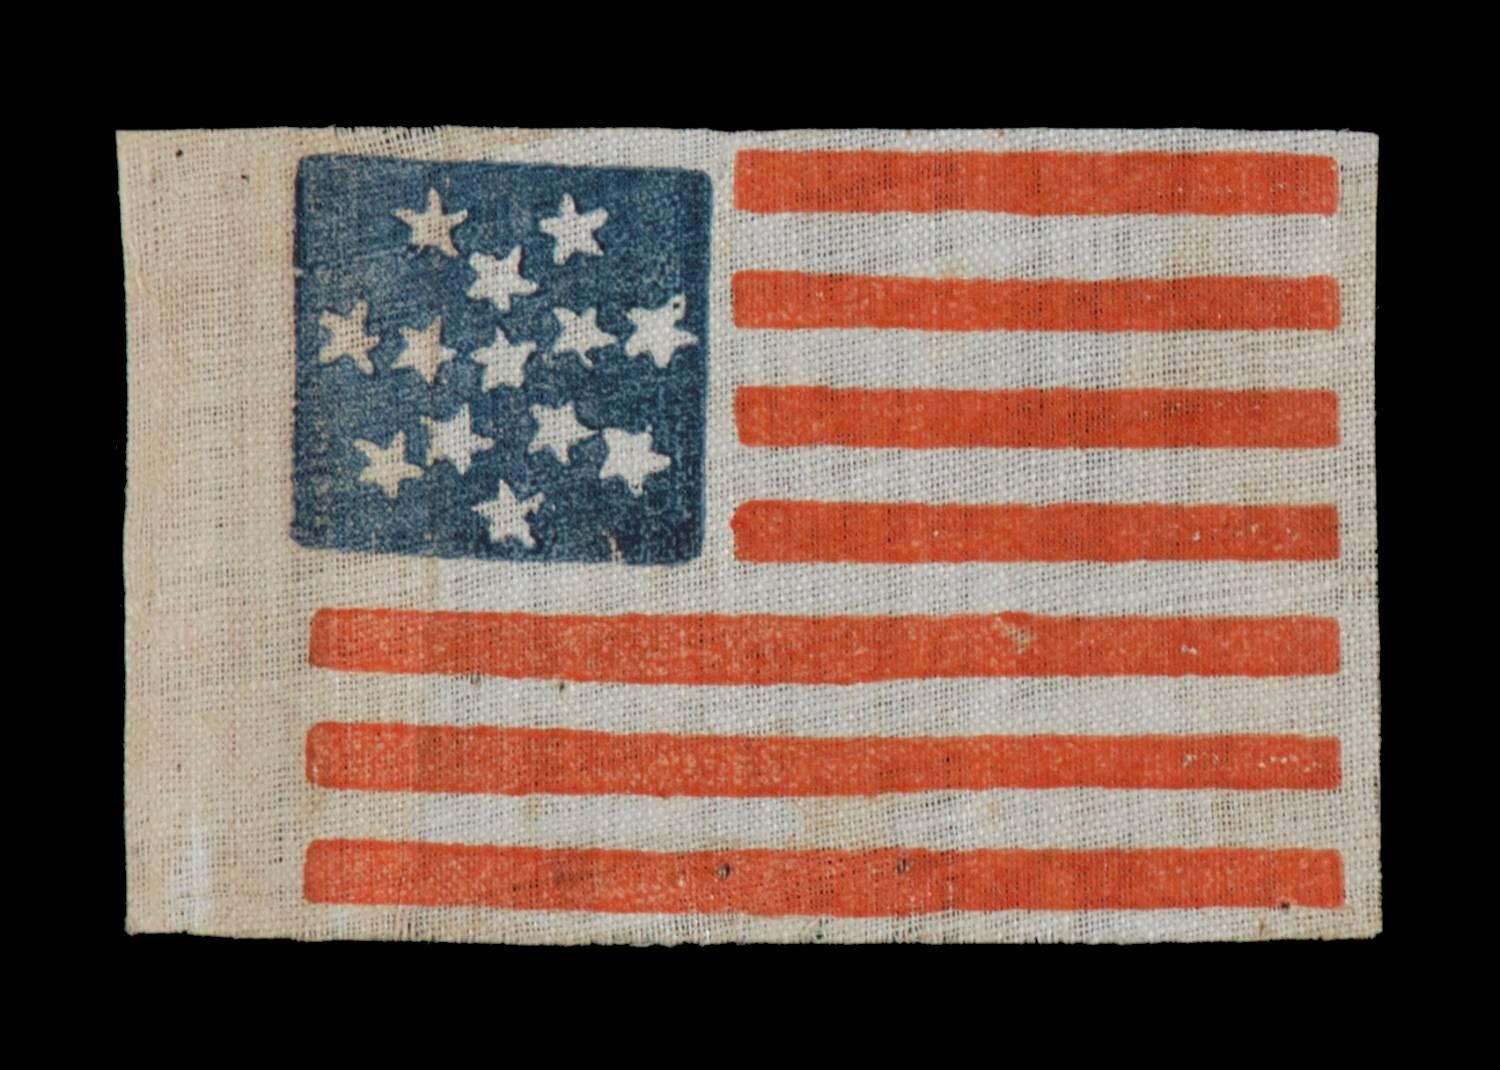 Rare 13 star parade flag dating to the civil war period (1861-1865) or prior, with an exceptionally rare and beautiful snowflake medallion configuration of 13 stars:

13 star American national flag, printed on glazed cotton, with a very rare